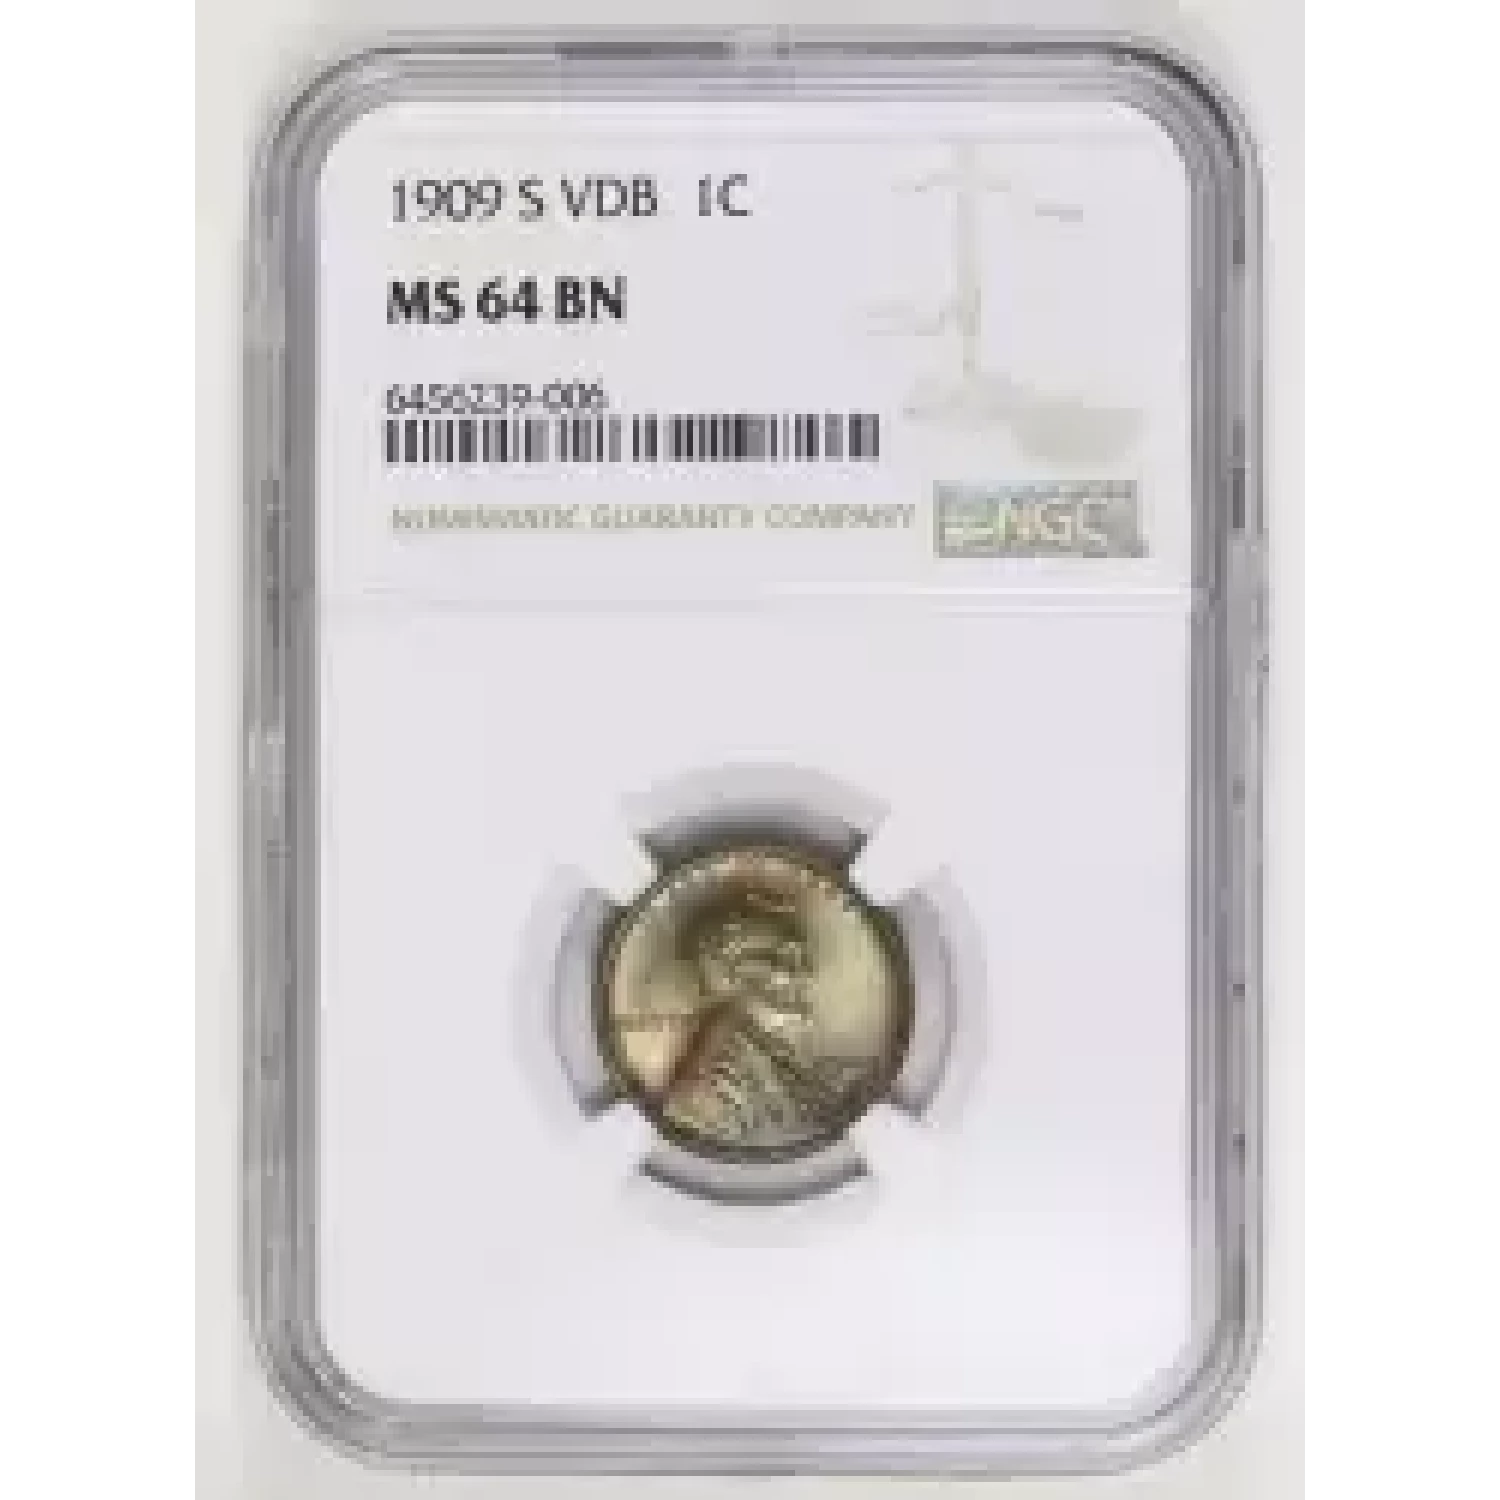 1857 Braided Hair Liberty Head Large Cent 1C PCGS MS62BN - Large